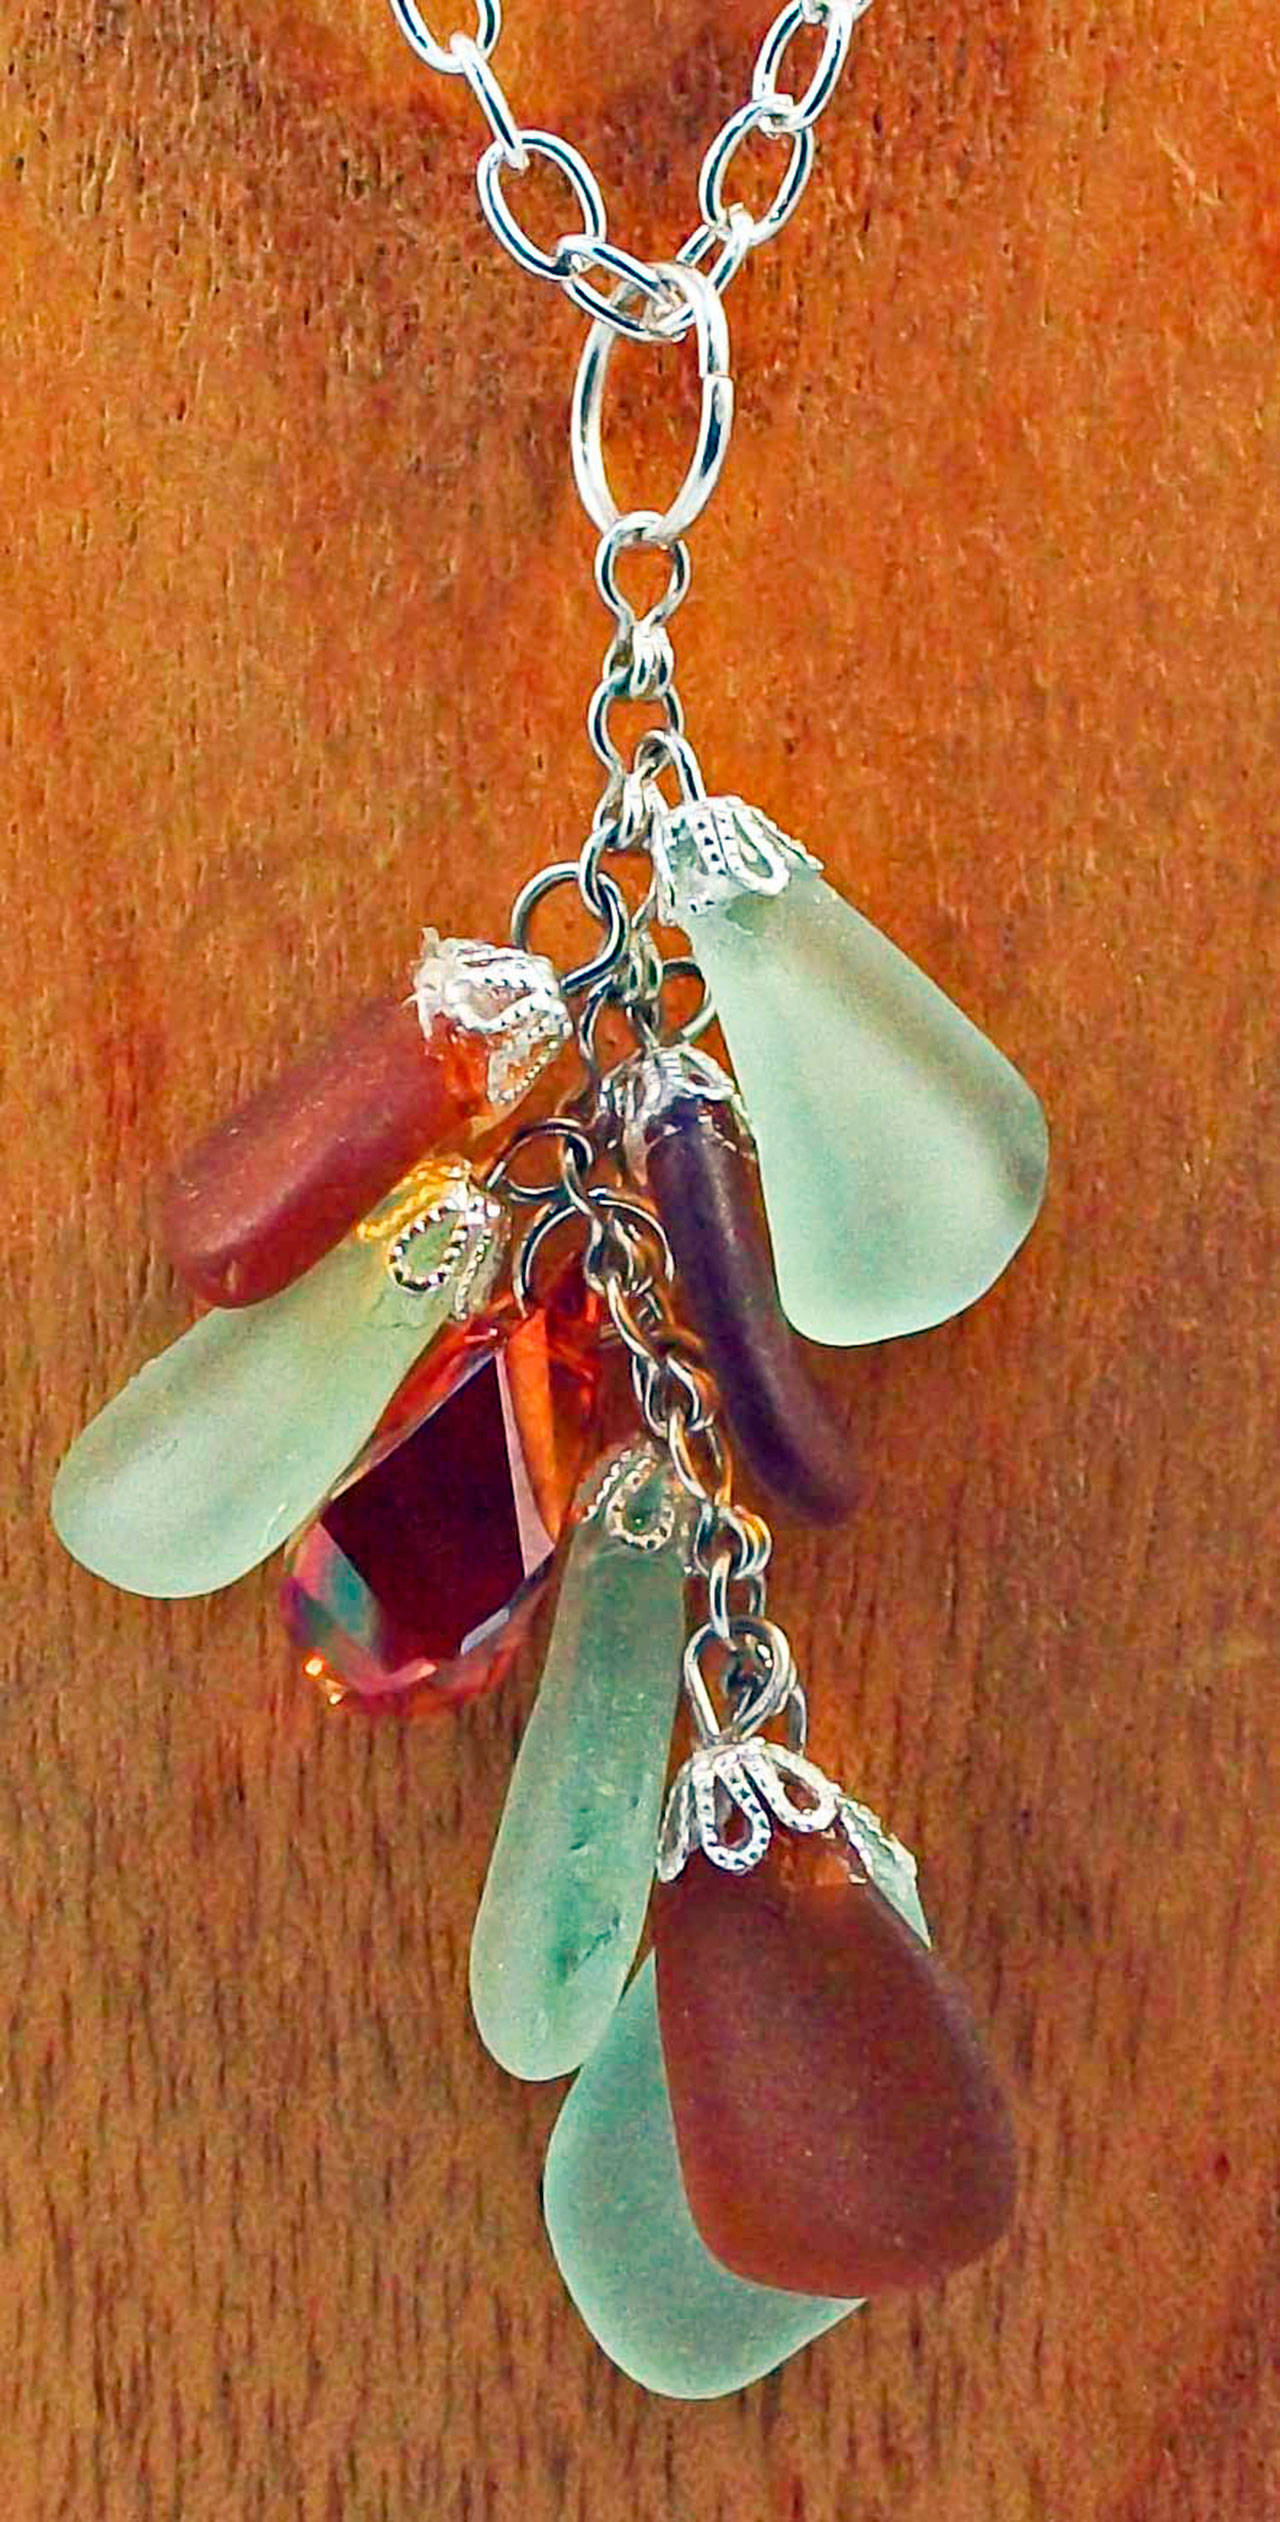 Nancy Rody’s sea glass jewelry is on display at Gallery 9